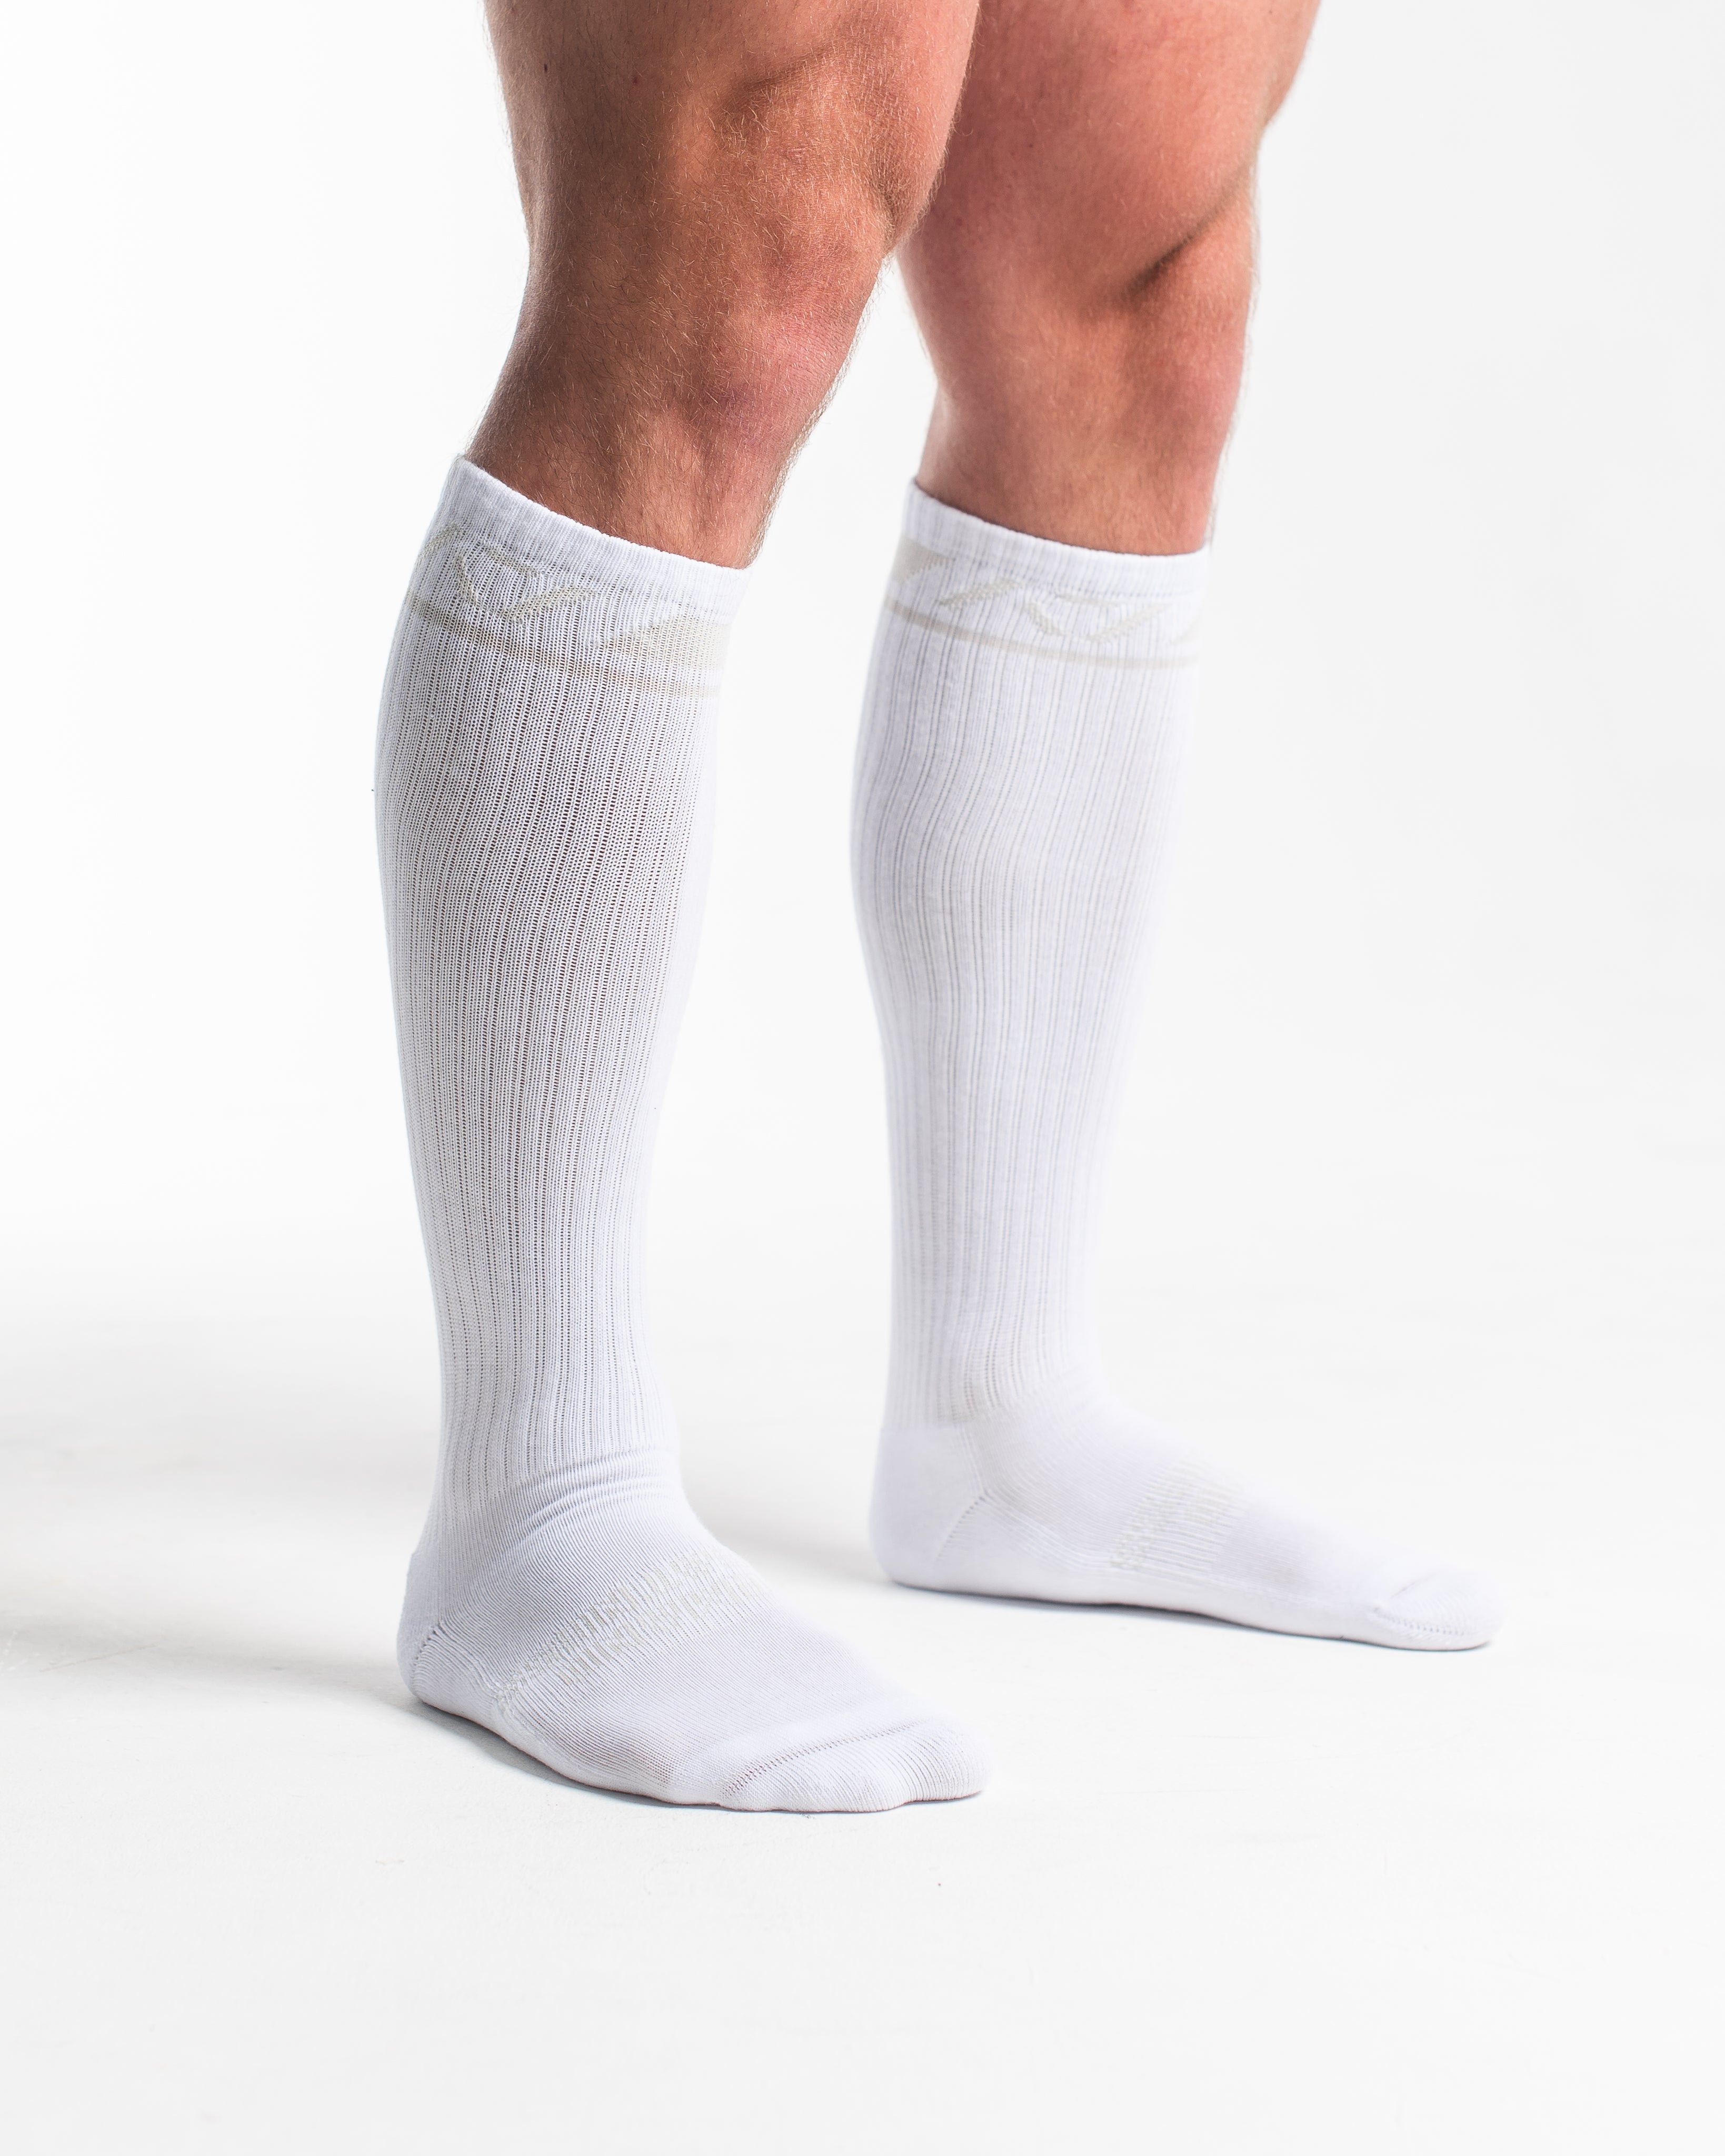 A7 Polar deadlift socks are designed specifically for pulls and keep your shins protected from scrapes. A7 deadlift socks are a perfect pair to wear in training or powerlifting competition. The A7 IPF Approved Kit includes Powerlifting Singlet, A7 Meet Shirt, A7 Zebra Wrist Wraps, A7 Deadlift Socks, Hourglass Knee Sleeves (Stiff Knee Sleeves and Rigor Mortis Knee Sleeves). All A7 Powerlifting Equipment shipping to UK, Norway, Switzerland and Iceland.